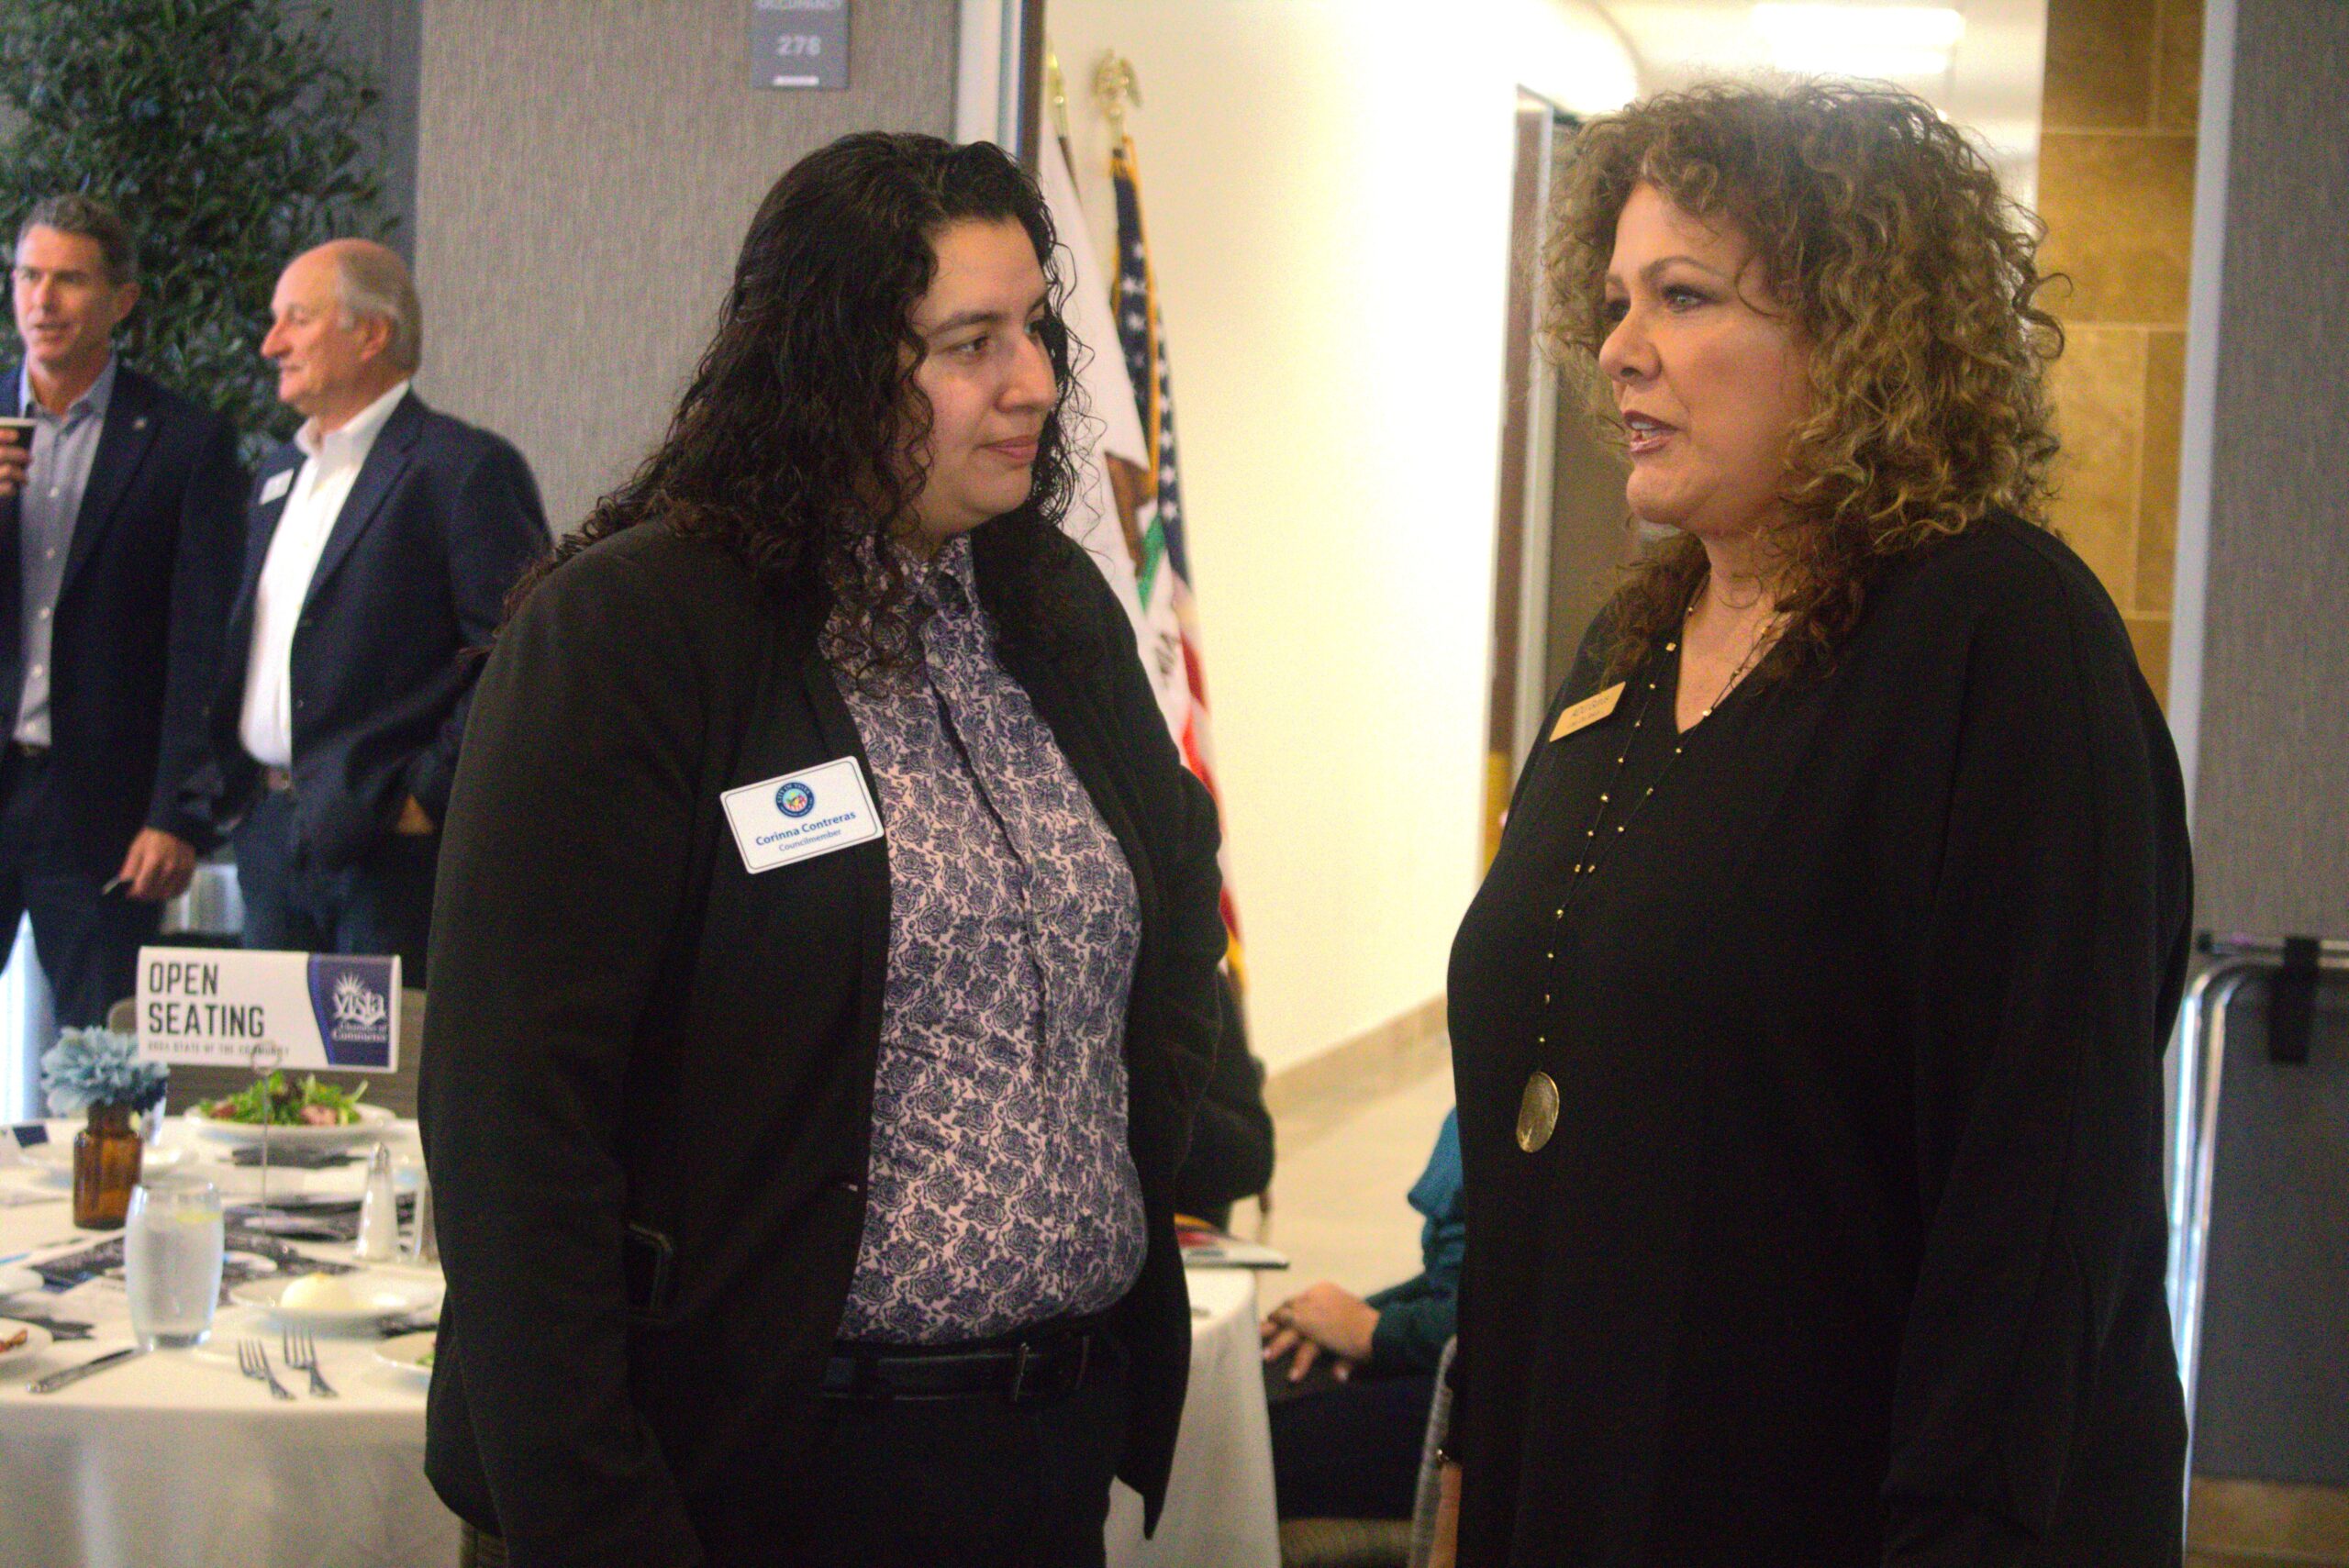 Councilmember Corinna Contreras speaks with community members at the Vista State of the Community event on Jan. 22. Photo by Laura Place